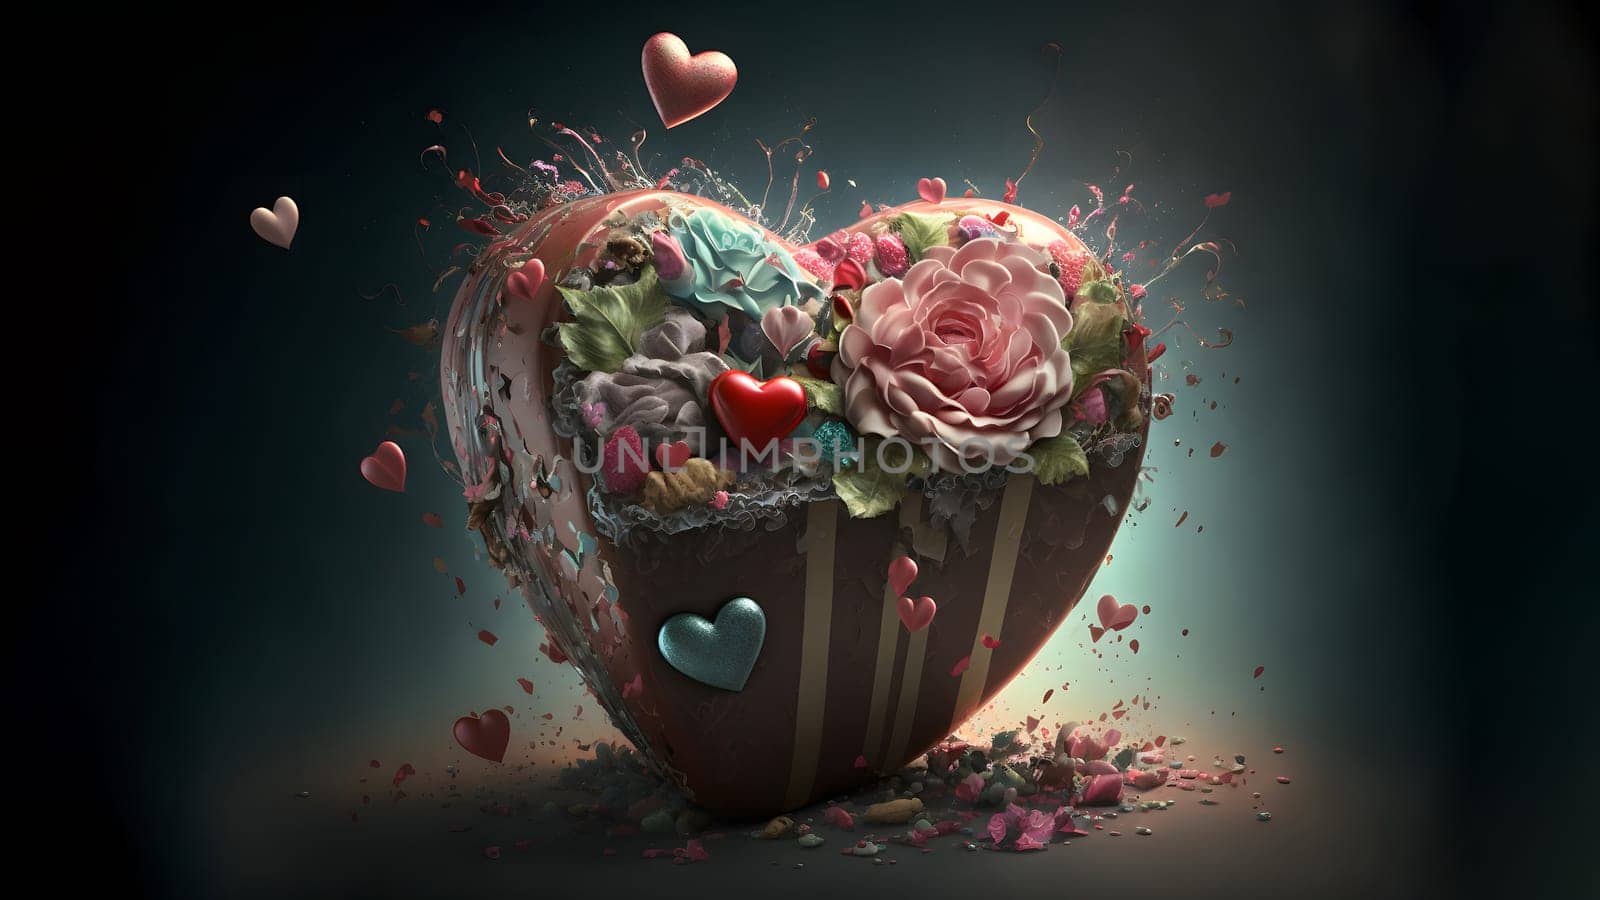 artistically chaotic valentines day heart candy with flowers inside, neural network generated art by z1b